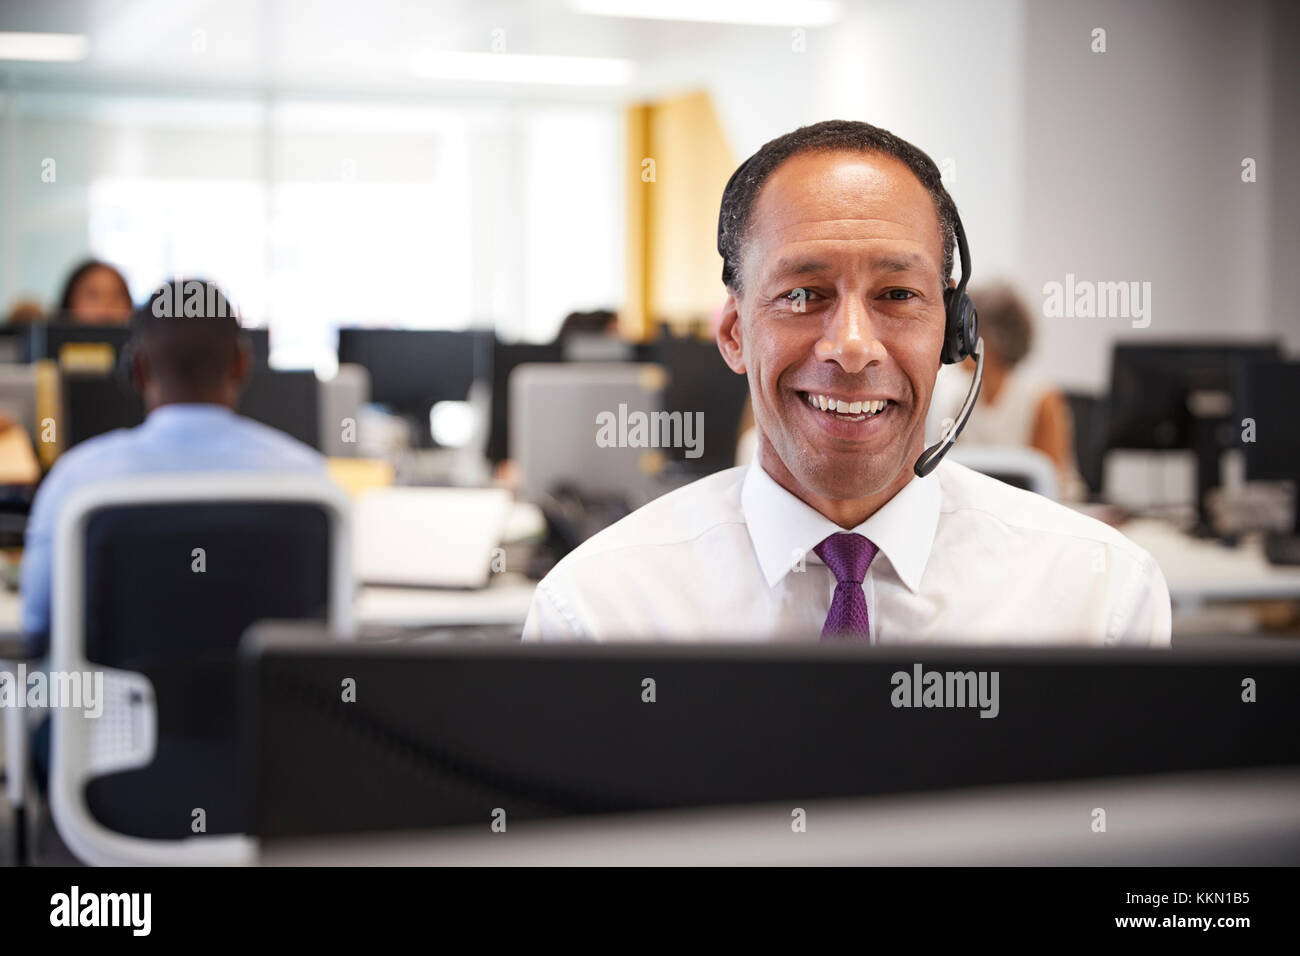 Middle aged man working at computer with headset in office Stock Photo